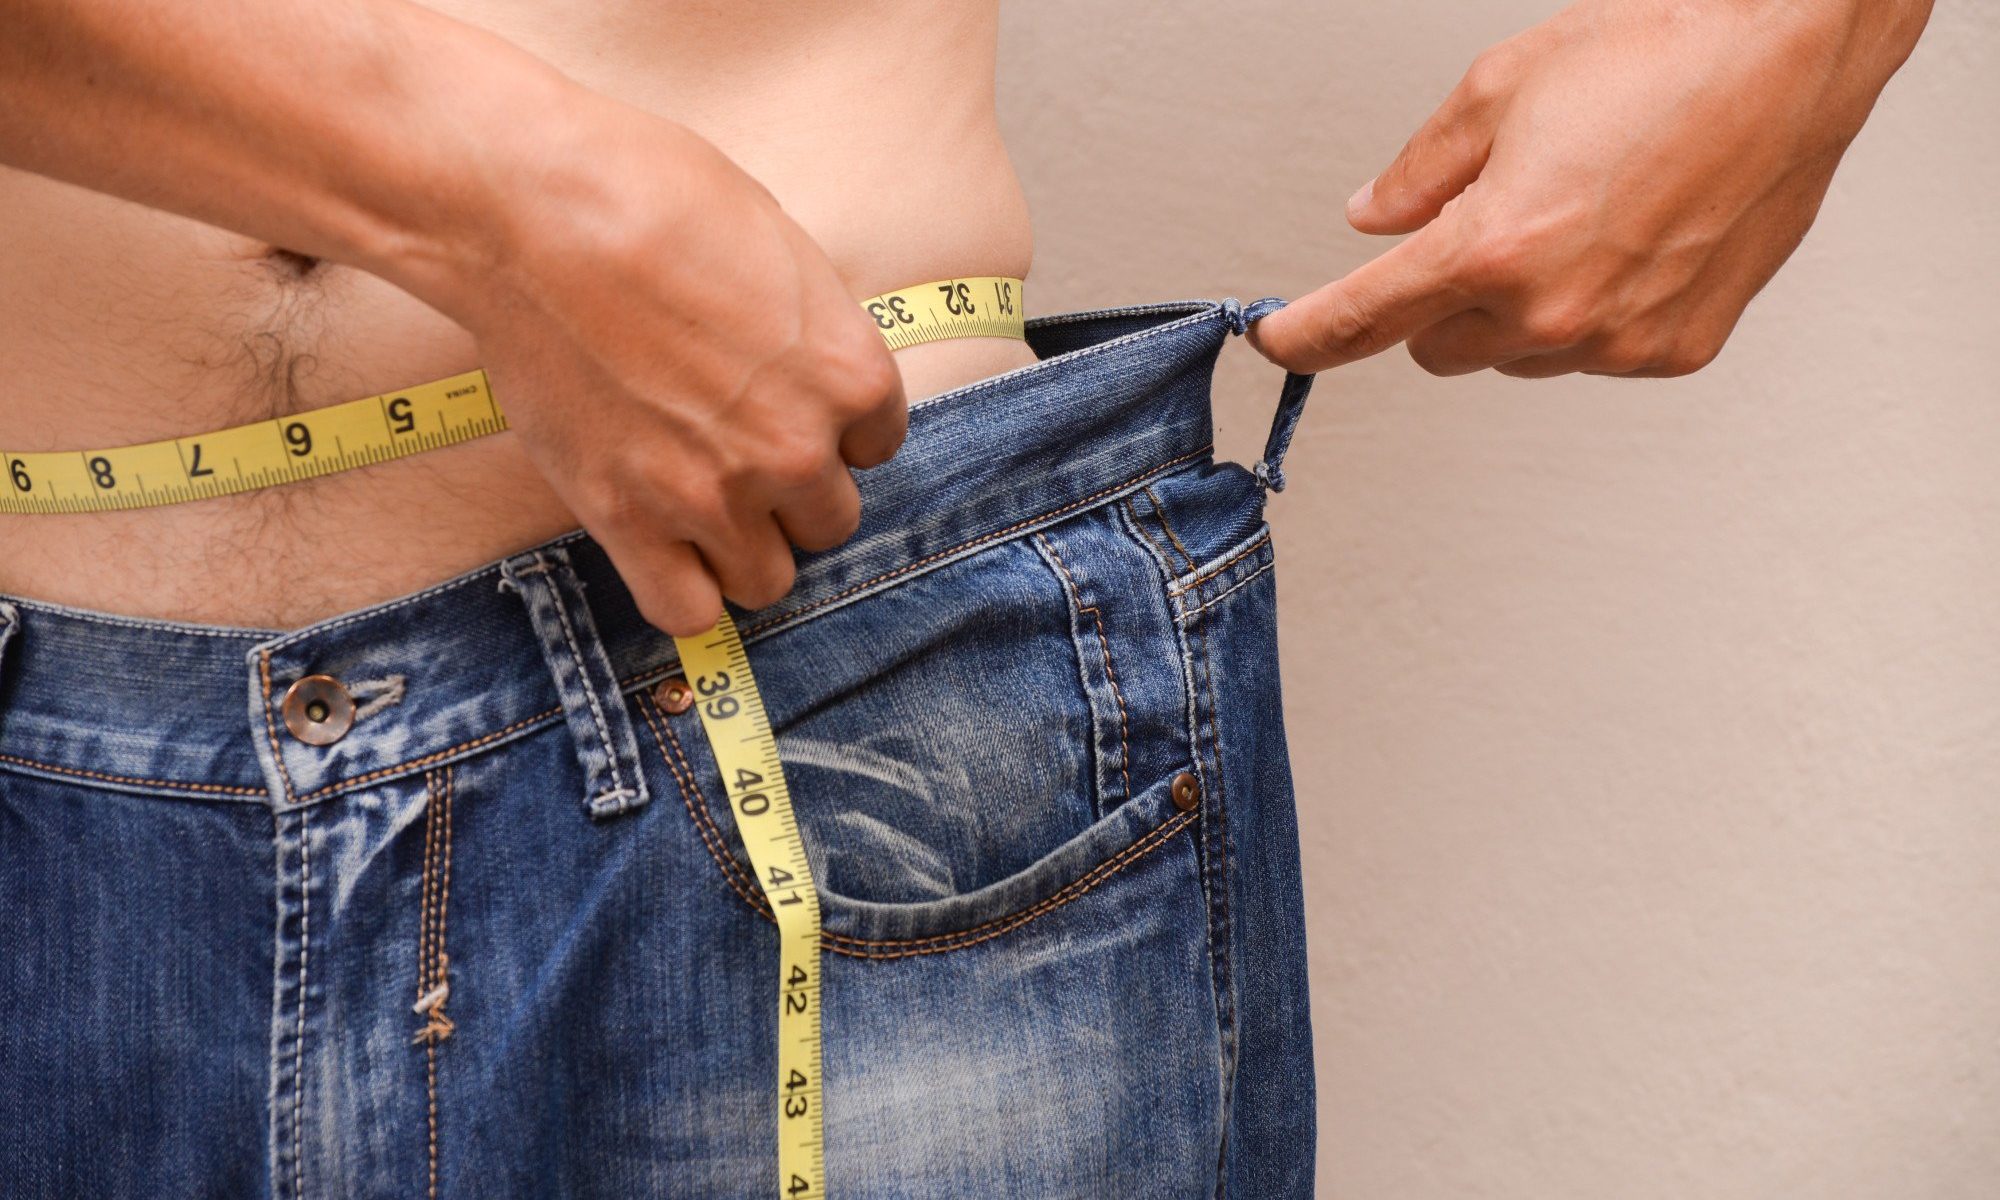 How to Use HCG for Losing Weight 3 Things You Should Know